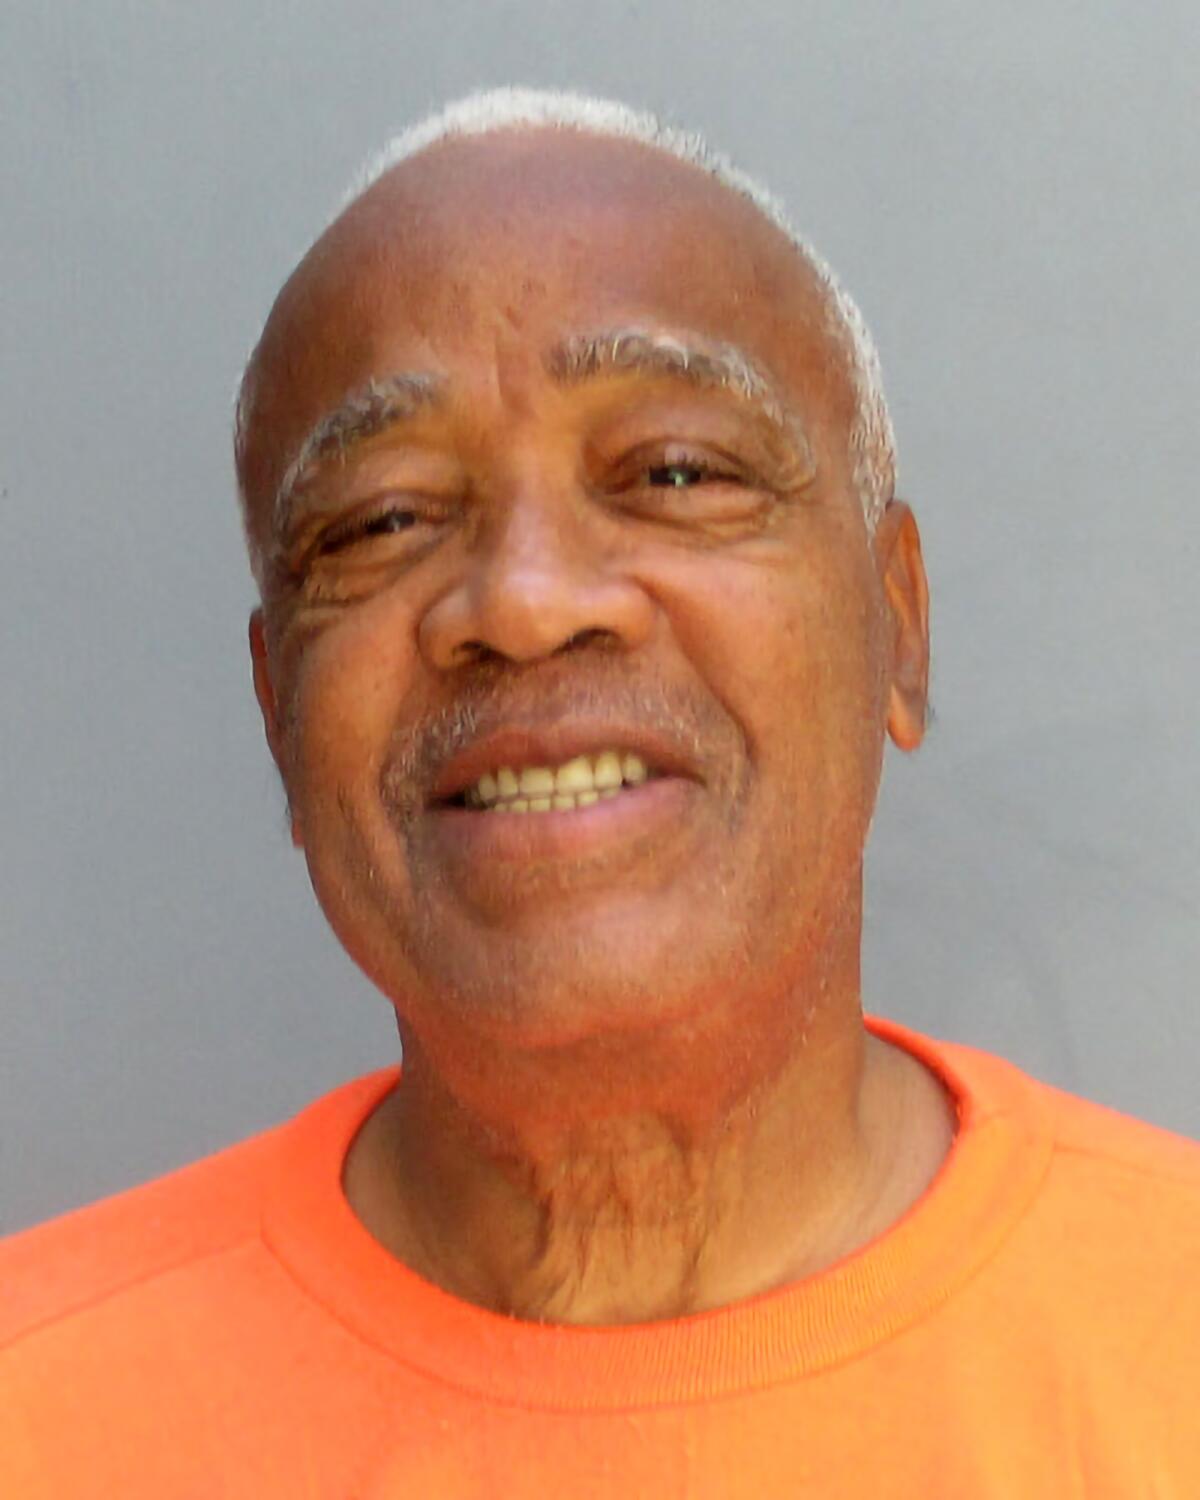 FILE - This undated photo provided by the Arizona Department of Corrections, Rehabilitation and Reentry shows prisoner Murray Hooper, who is scheduled to be executed by lethal injection on Nov. 16, 2022, for his convictions in the 1980 killings of Pat Redmond and his mother-in-law, Helen Phelps, in Phoenix. On Thursday, Nov. 3, 2022, the Arizona Board of Executive Clemency declined to recommend to Gov. Doug Ducey that Hooper's death sentence be reduced to life in prison. The decision marks one of the last steps before Hooper's execution. (Arizona Department of Corrections, Rehabilitation and Reentry via AP, File)